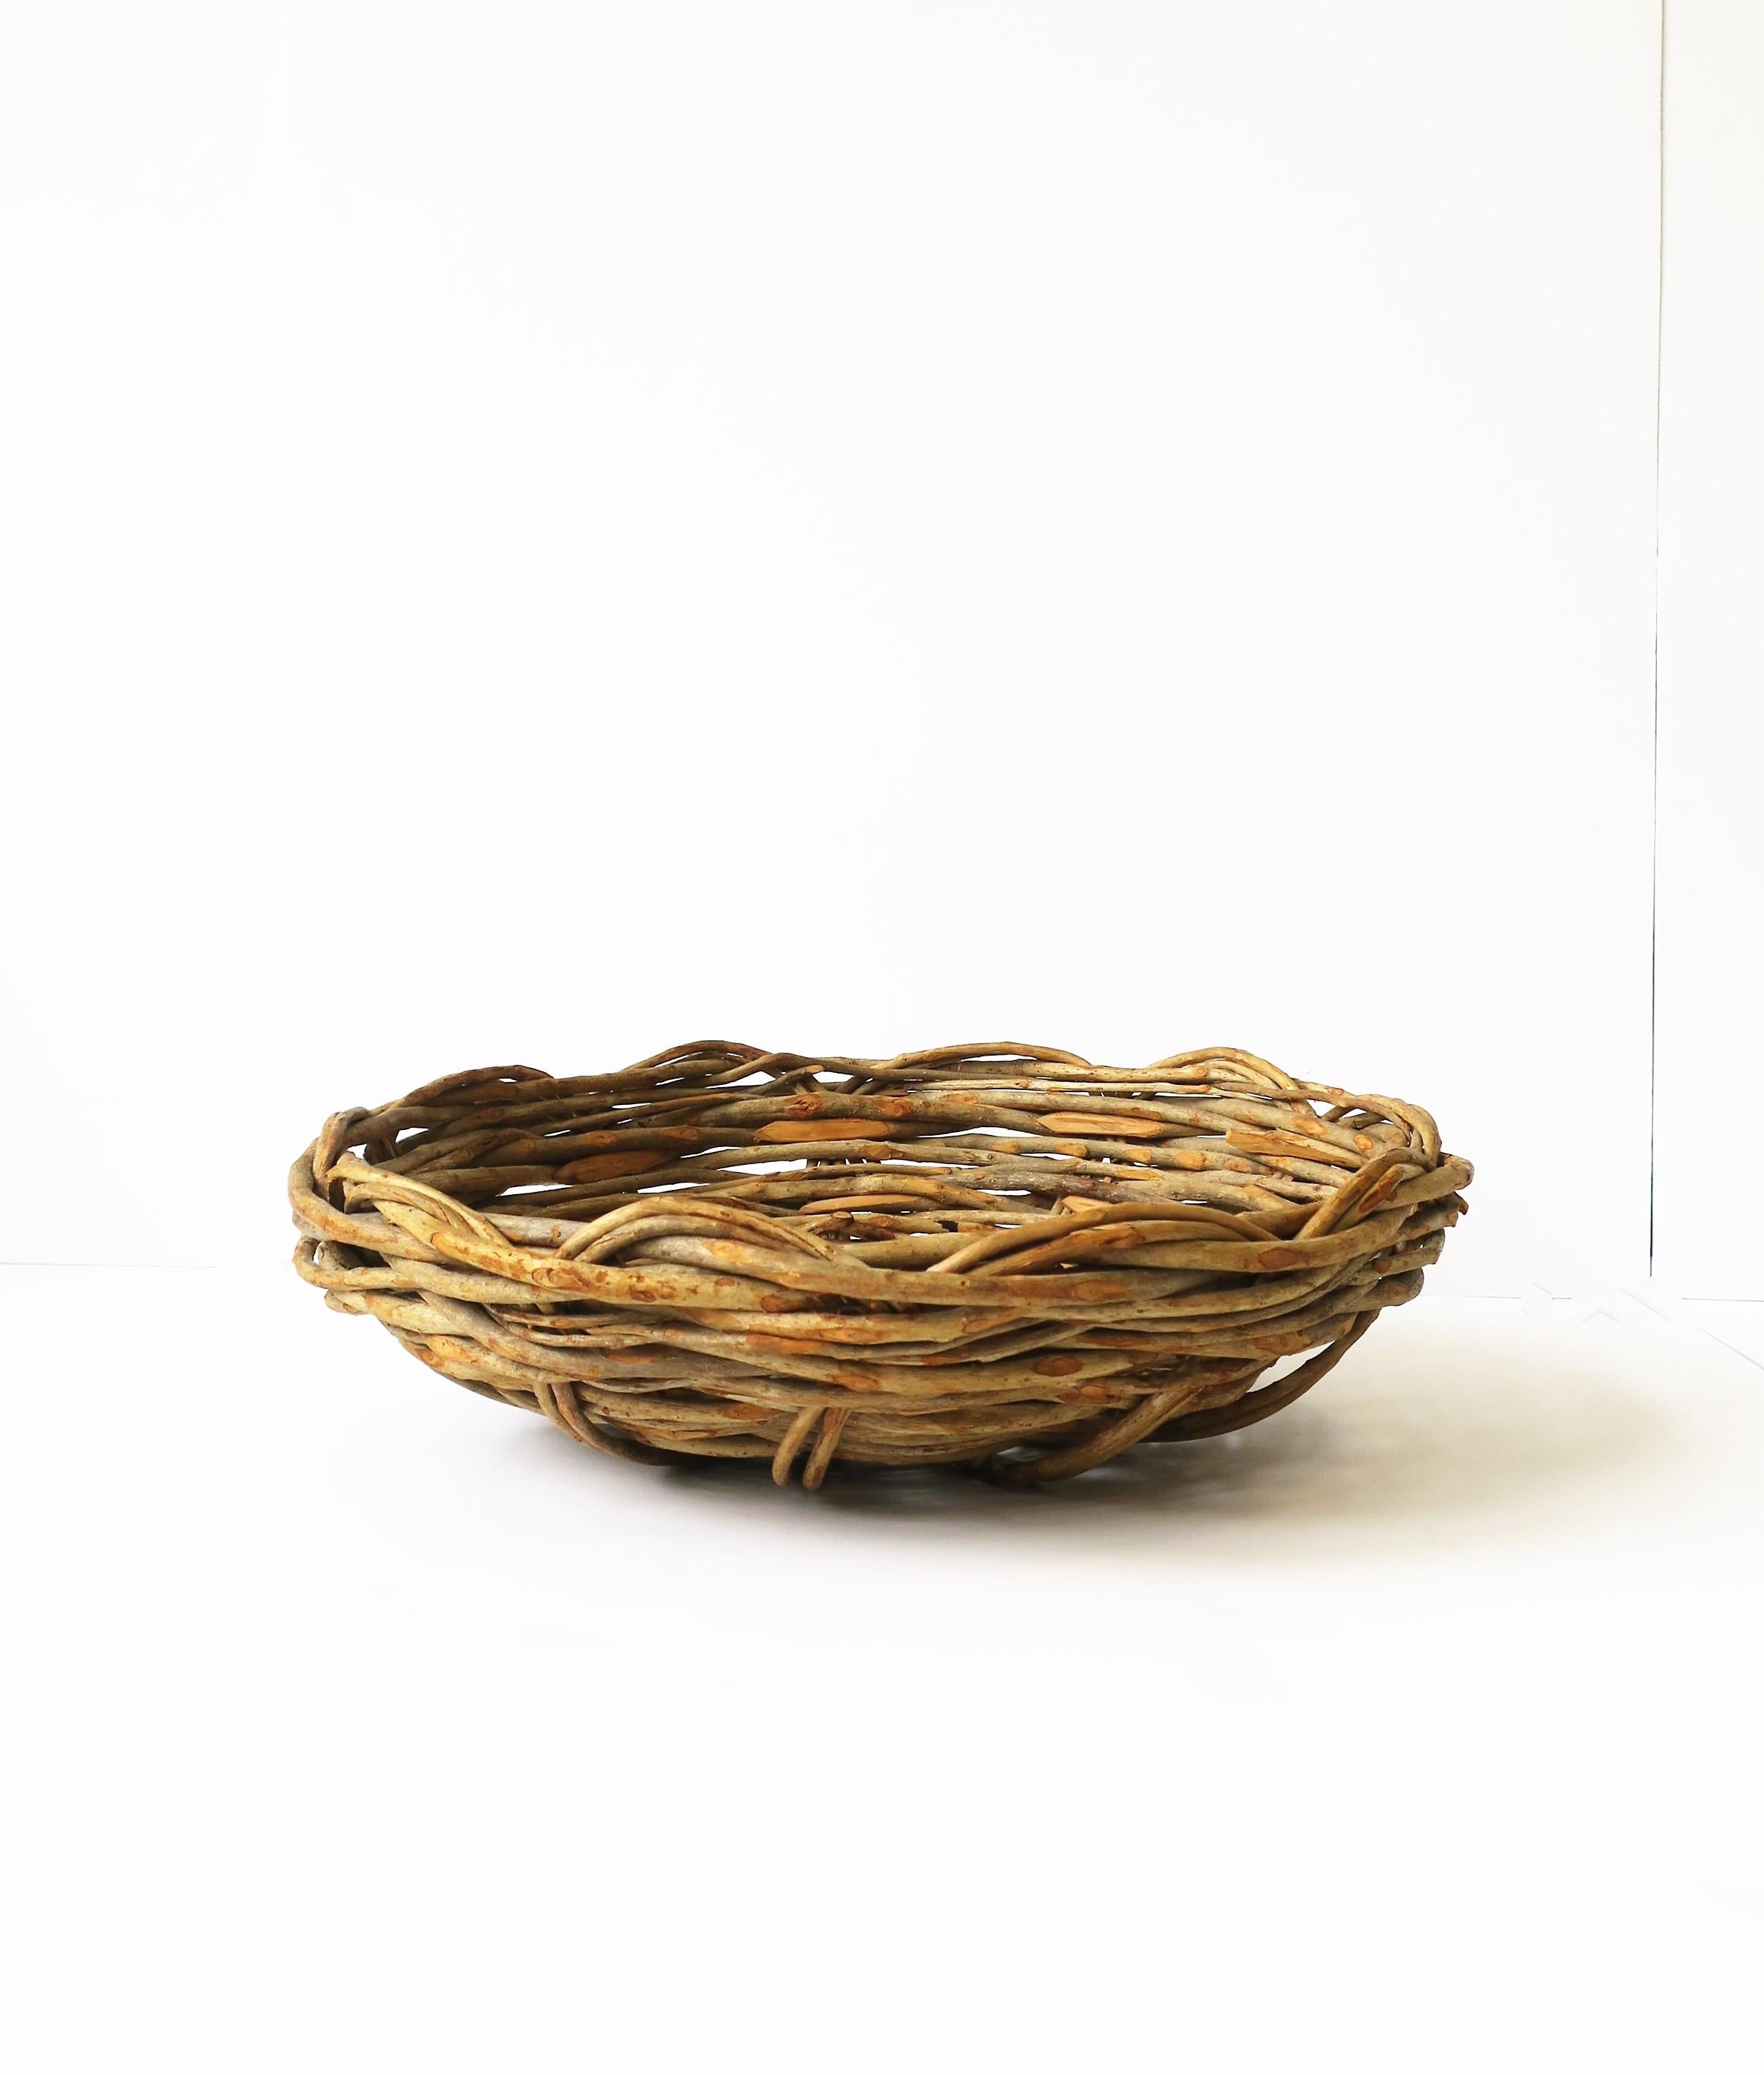 A round rustic wicker basket centerpiece or catchall, circa 20th century. Great as a standalone piece or for vegetables, fruit, flowers, etc. Could serve as a table centerpiece or catchall vide-poche, etc. Basket is a nice size measuring: 4.5